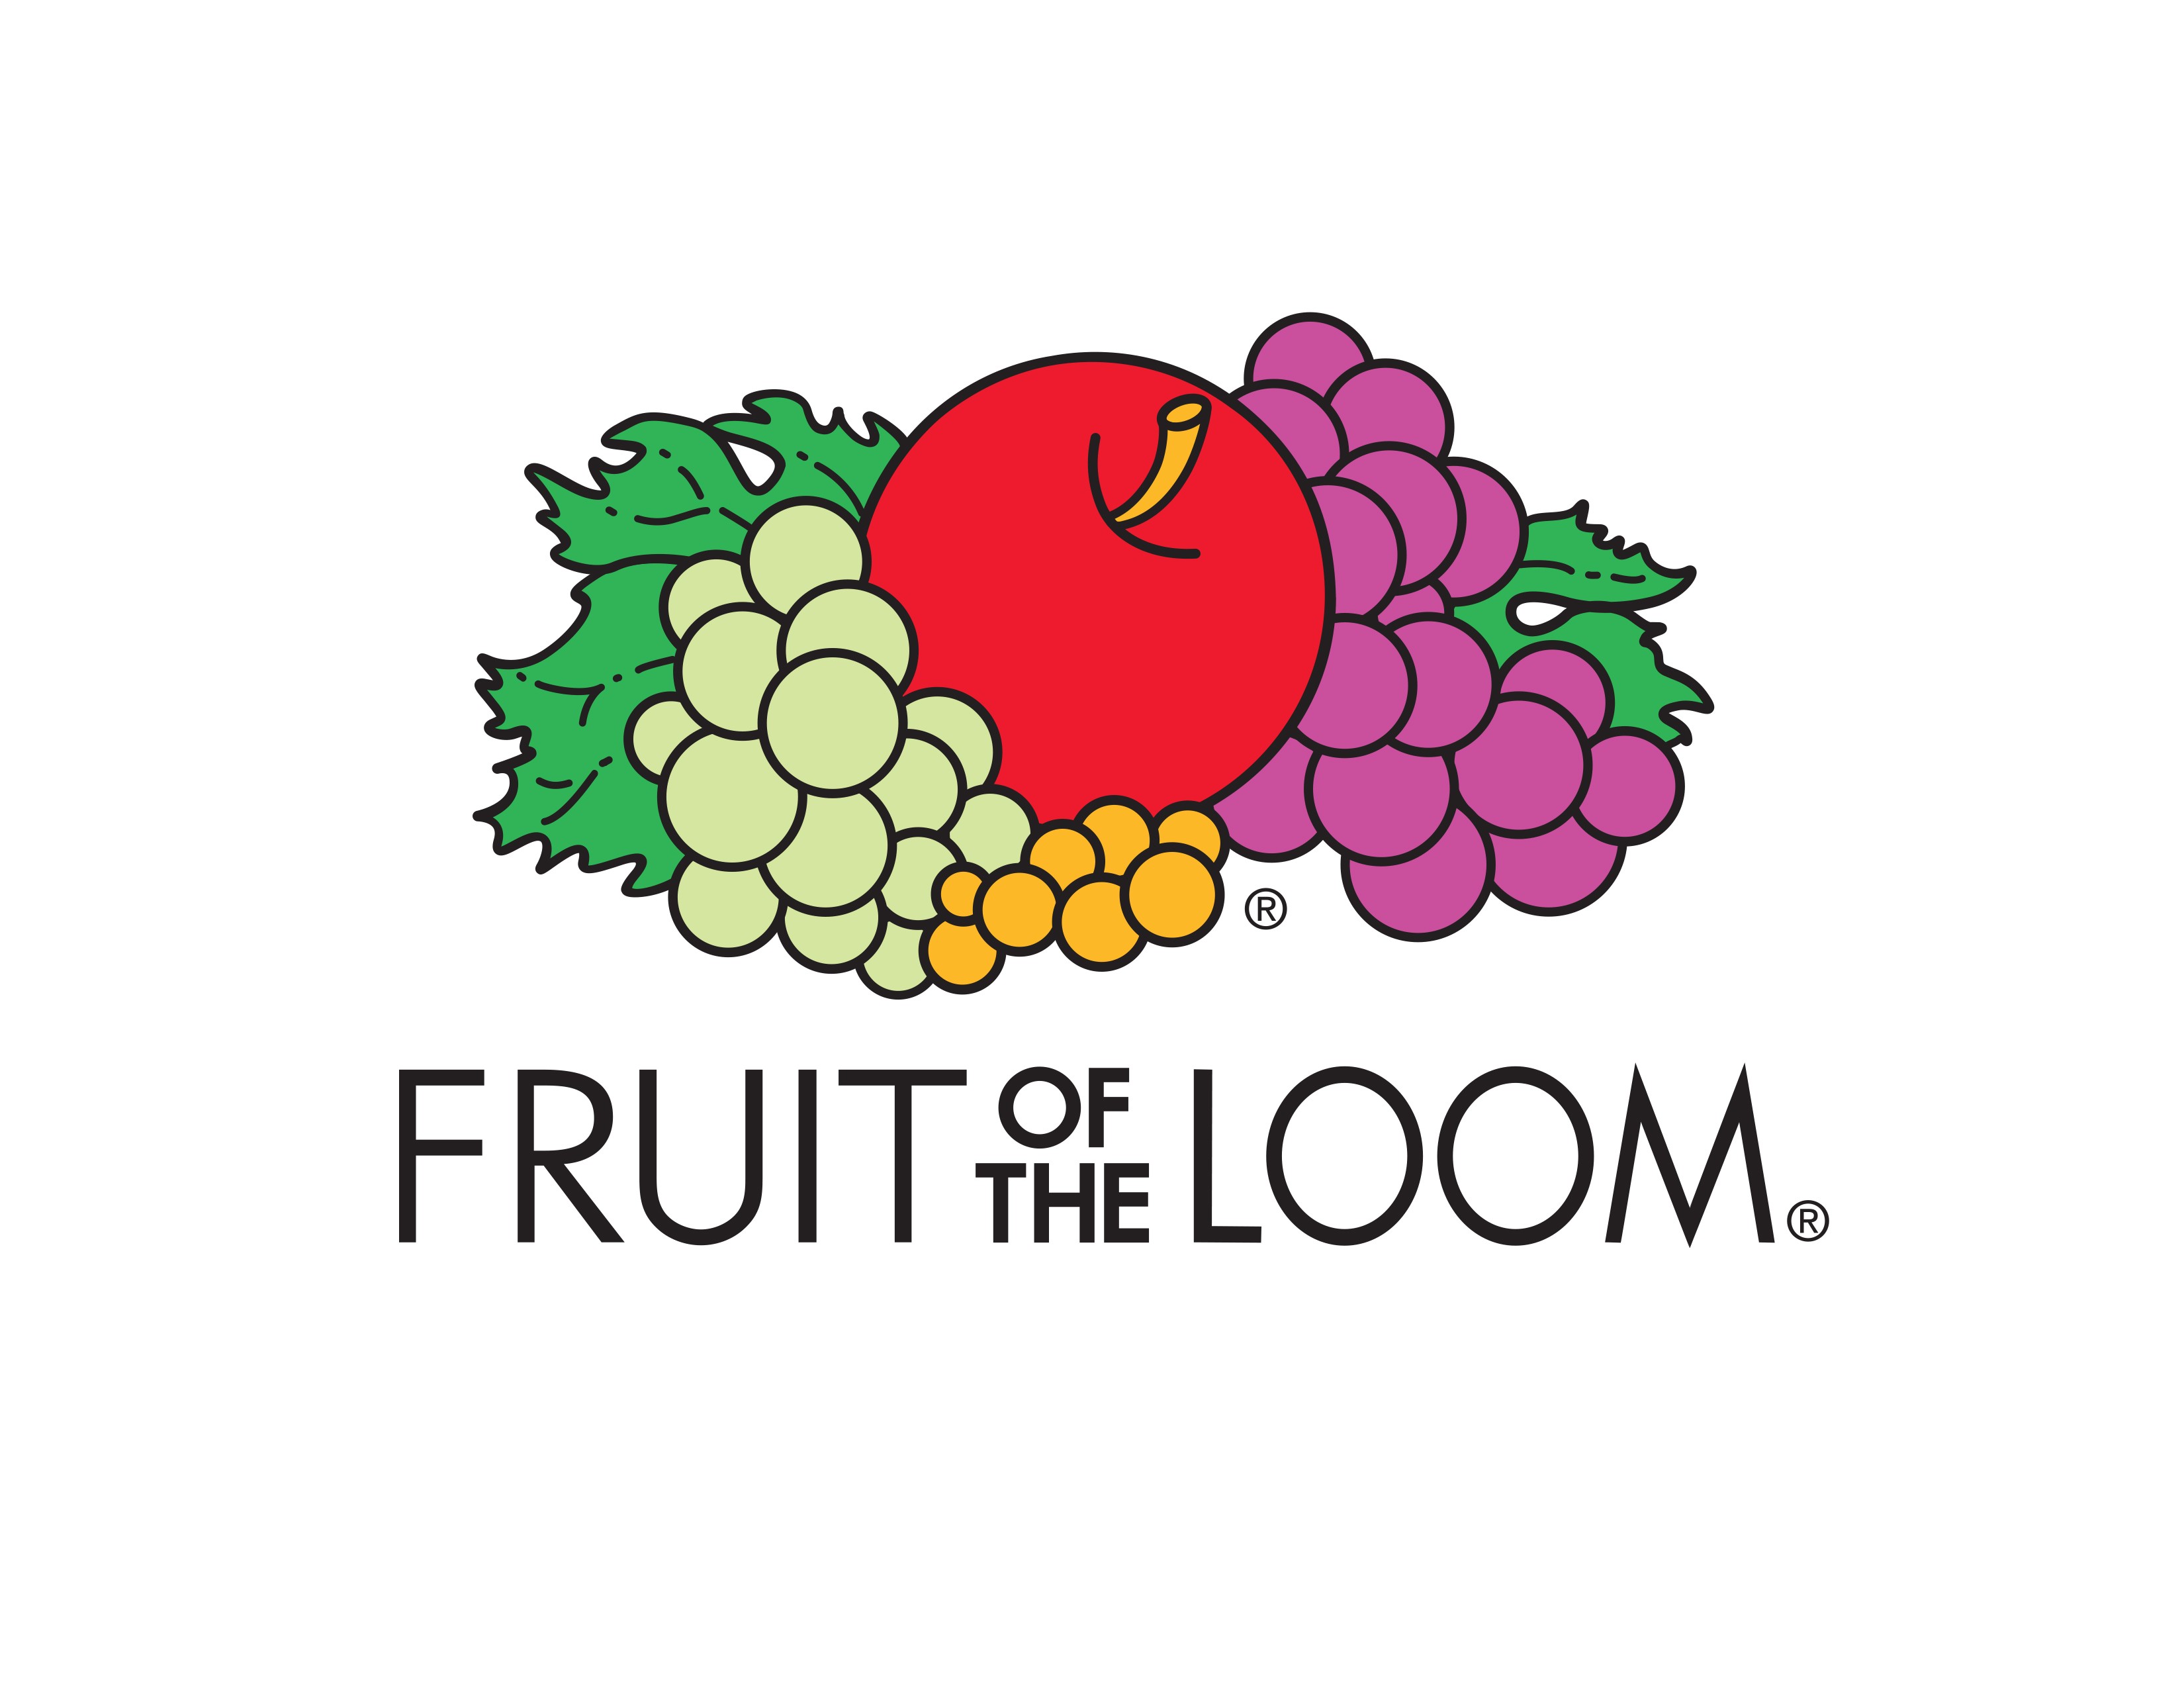 4. Fruit of the loom